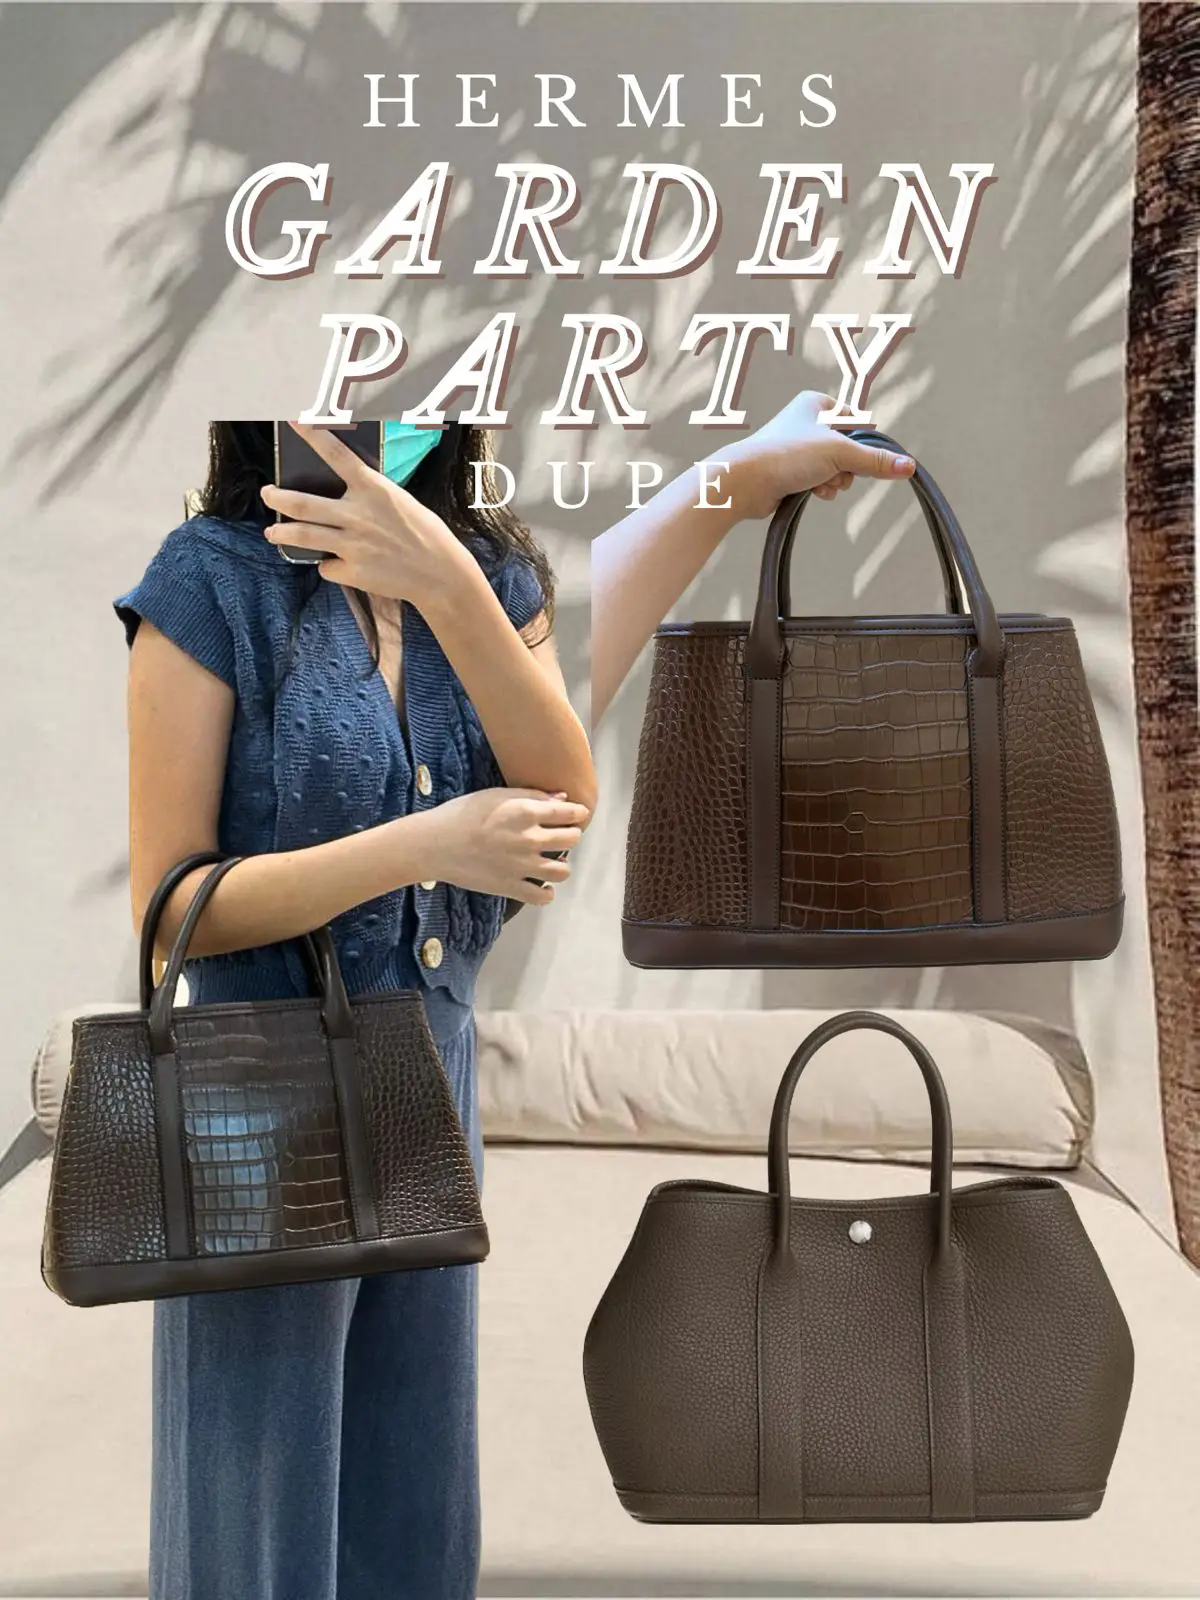 Where to Find the Best Hermes Garden Party Dupe